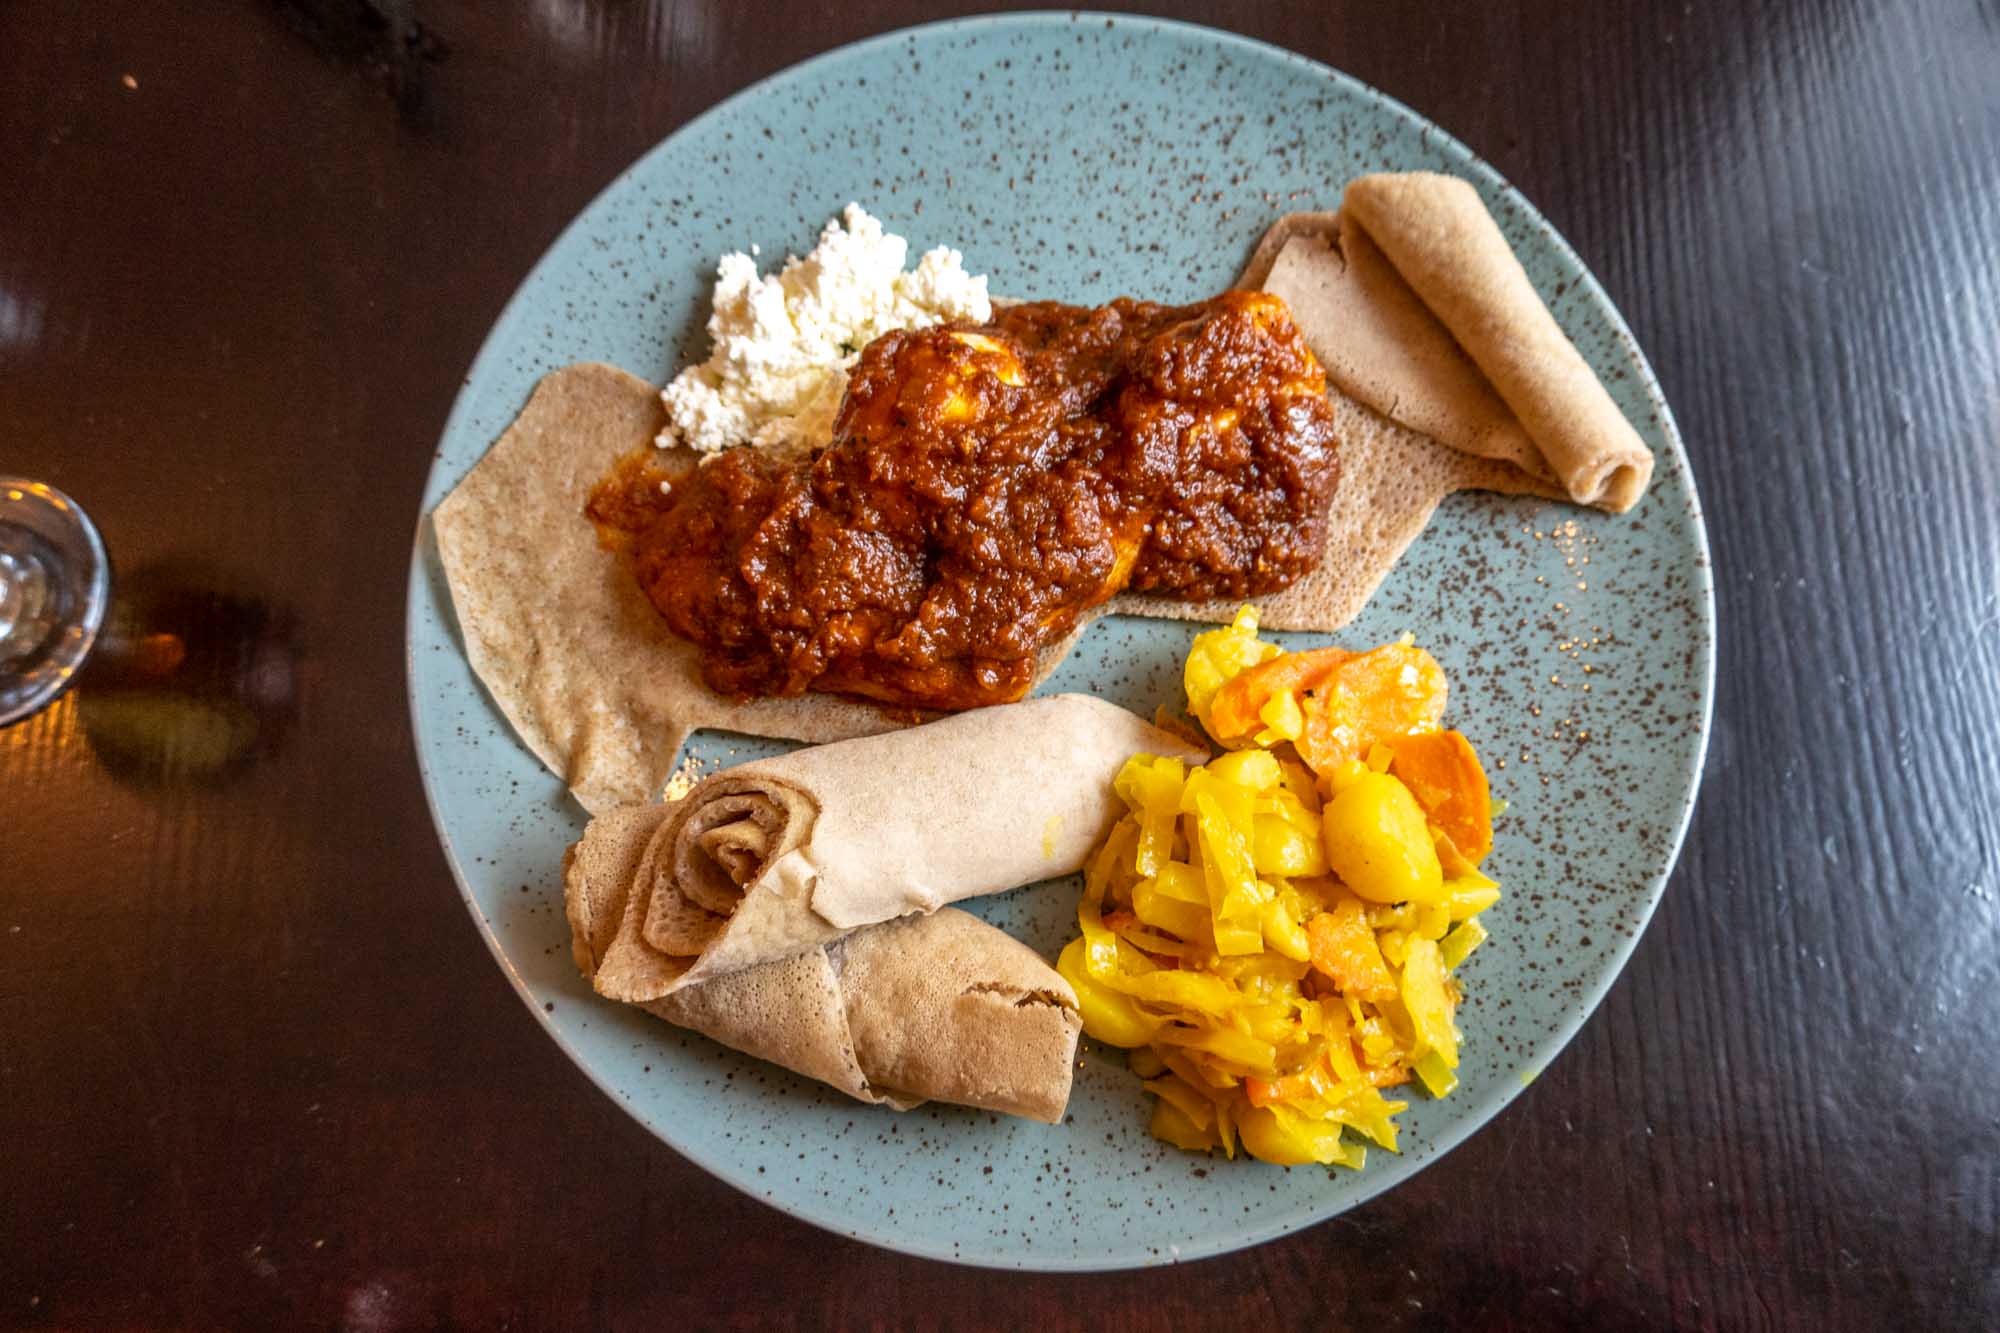 Plate of Ethiopian food, including the spongy bread